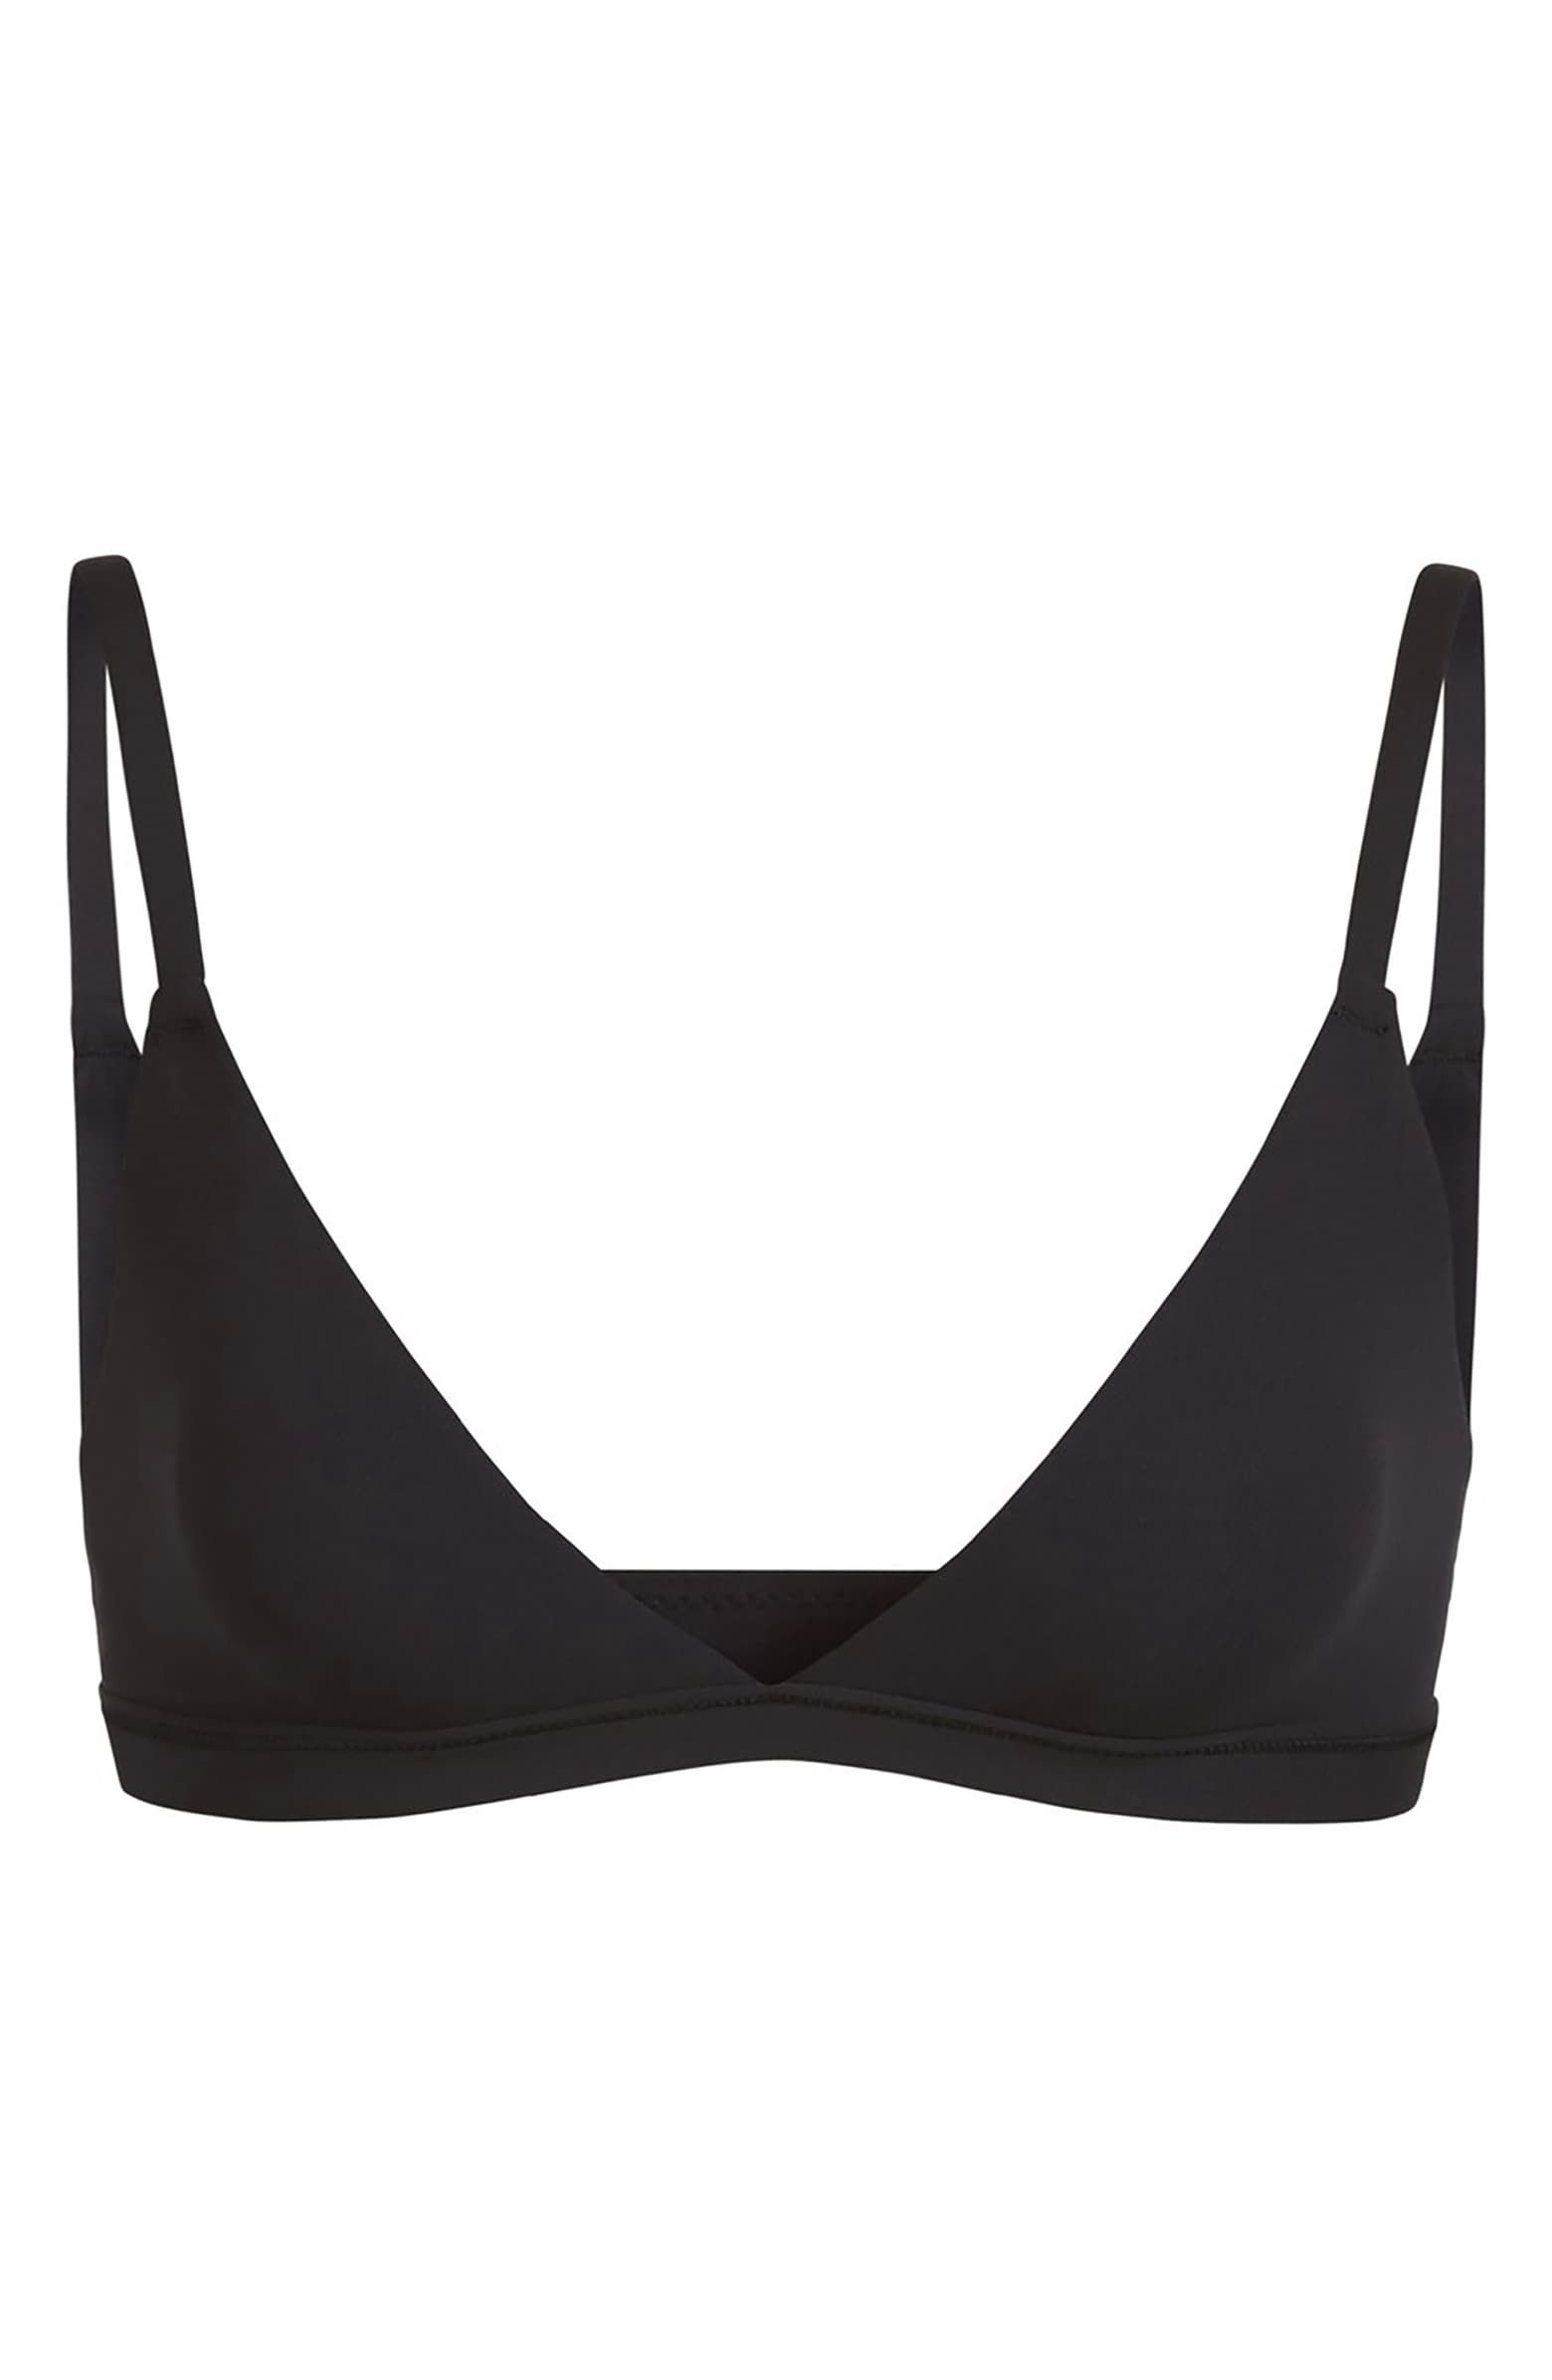 Small-Chested Ladies, Rejoice—These Bras Were Made for You – Outlet119